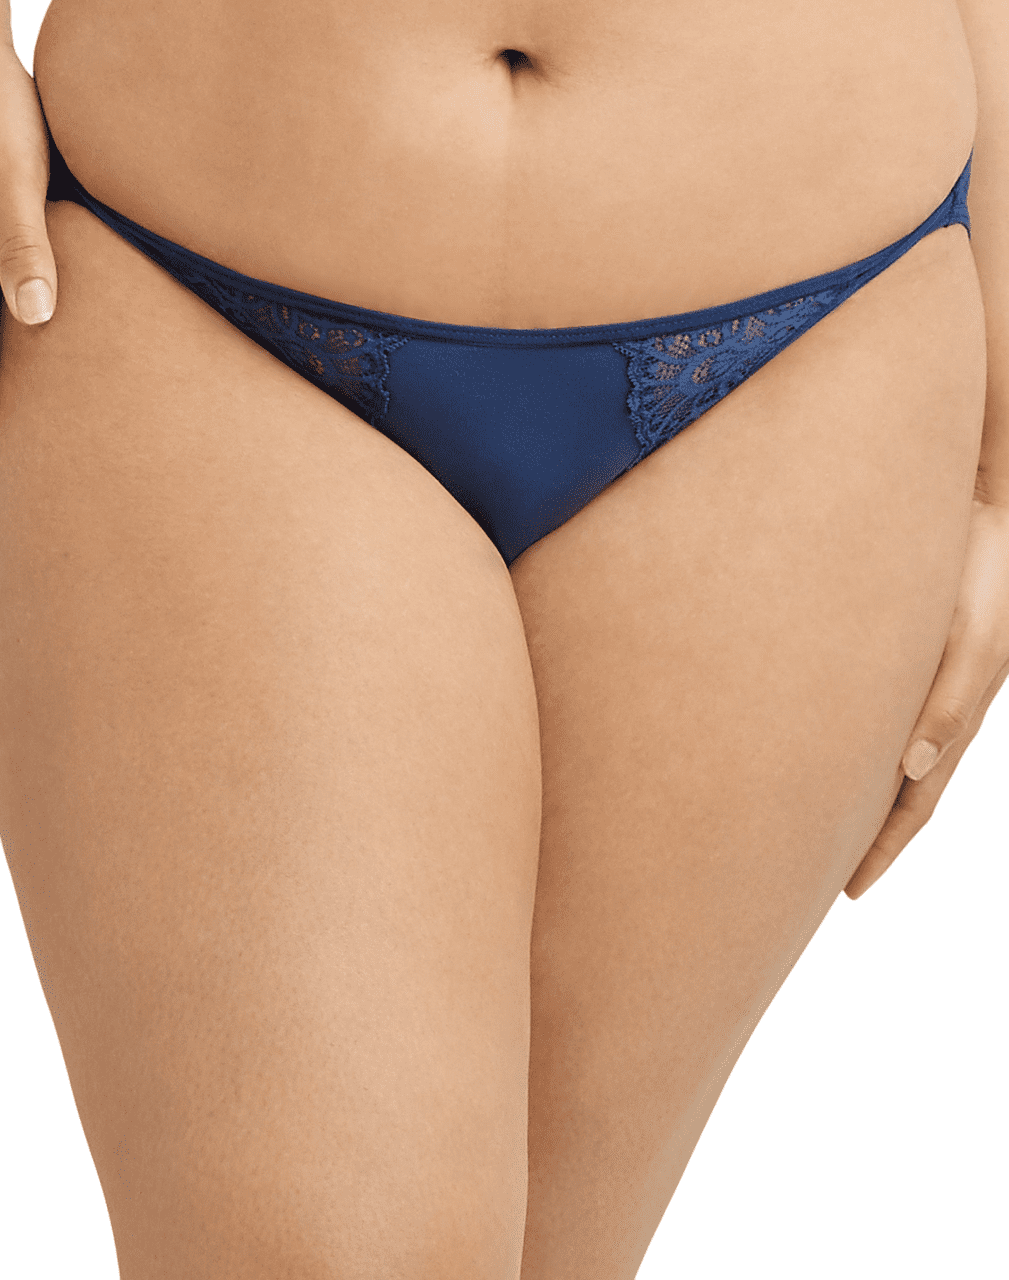  Maidenform Women's Underwear Back, Tanga Lace Thong Panties  (Retired Colors), Navy Eclipse/Gold, 6 : Clothing, Shoes & Jewelry